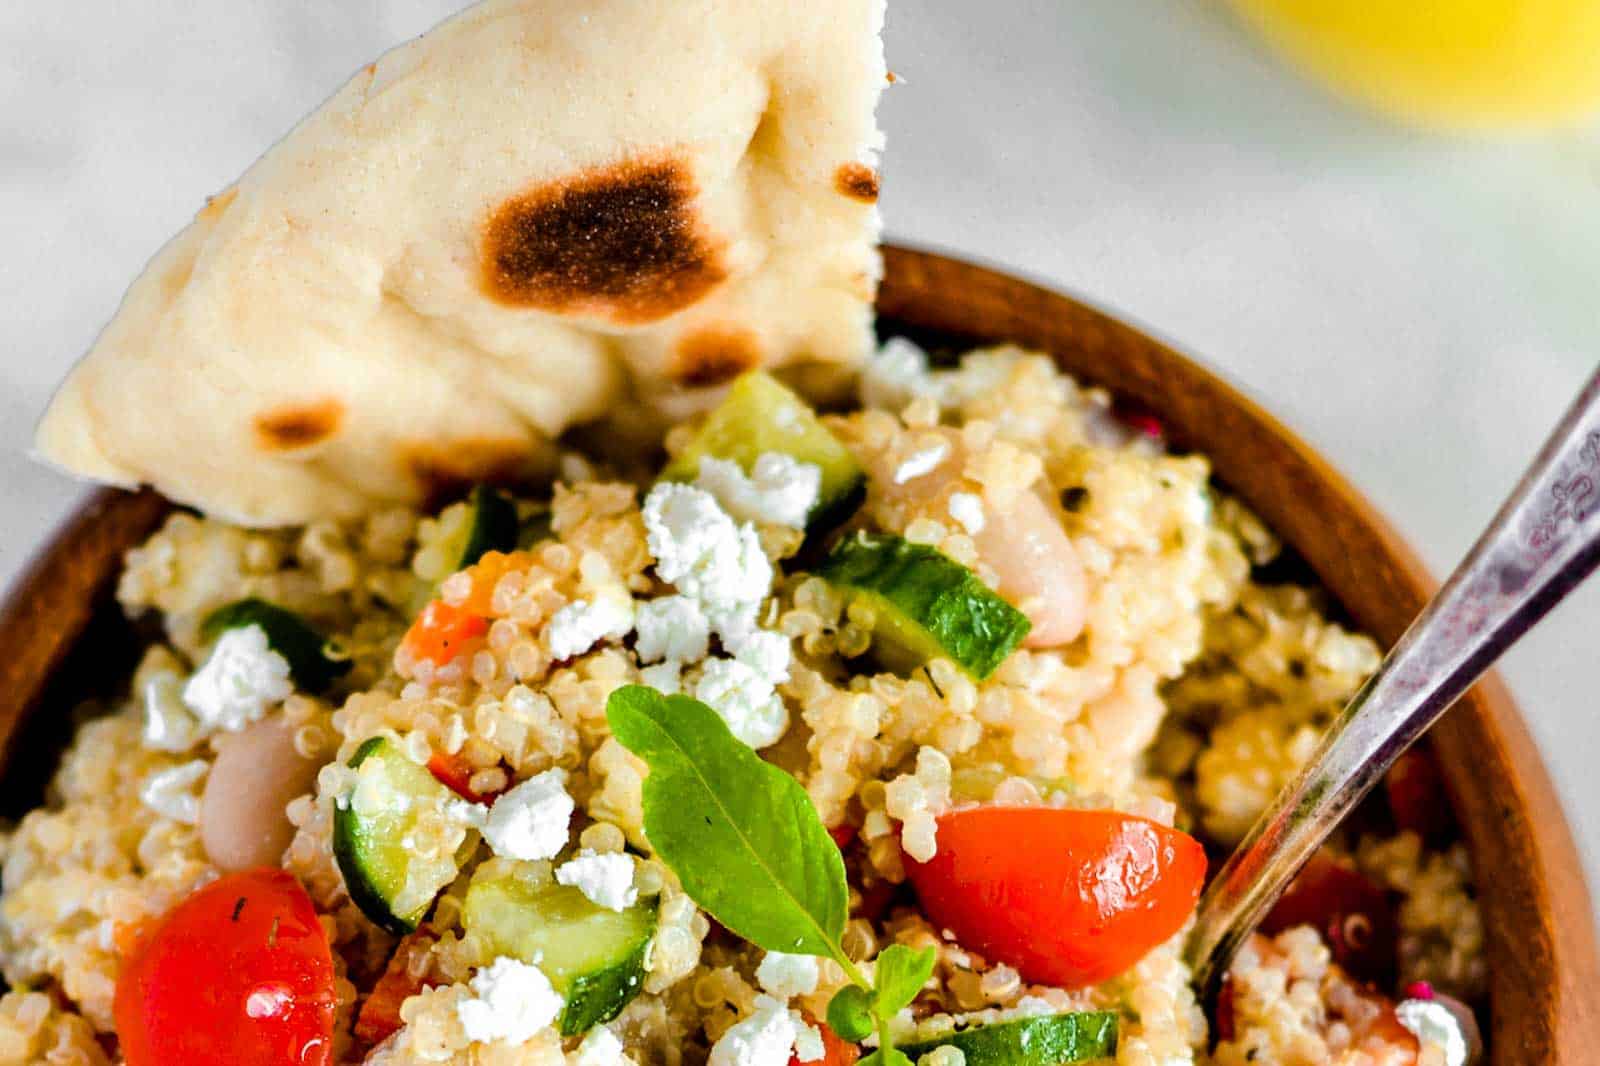 Quinoa salad in a brown bowl, garnished with pita bread.